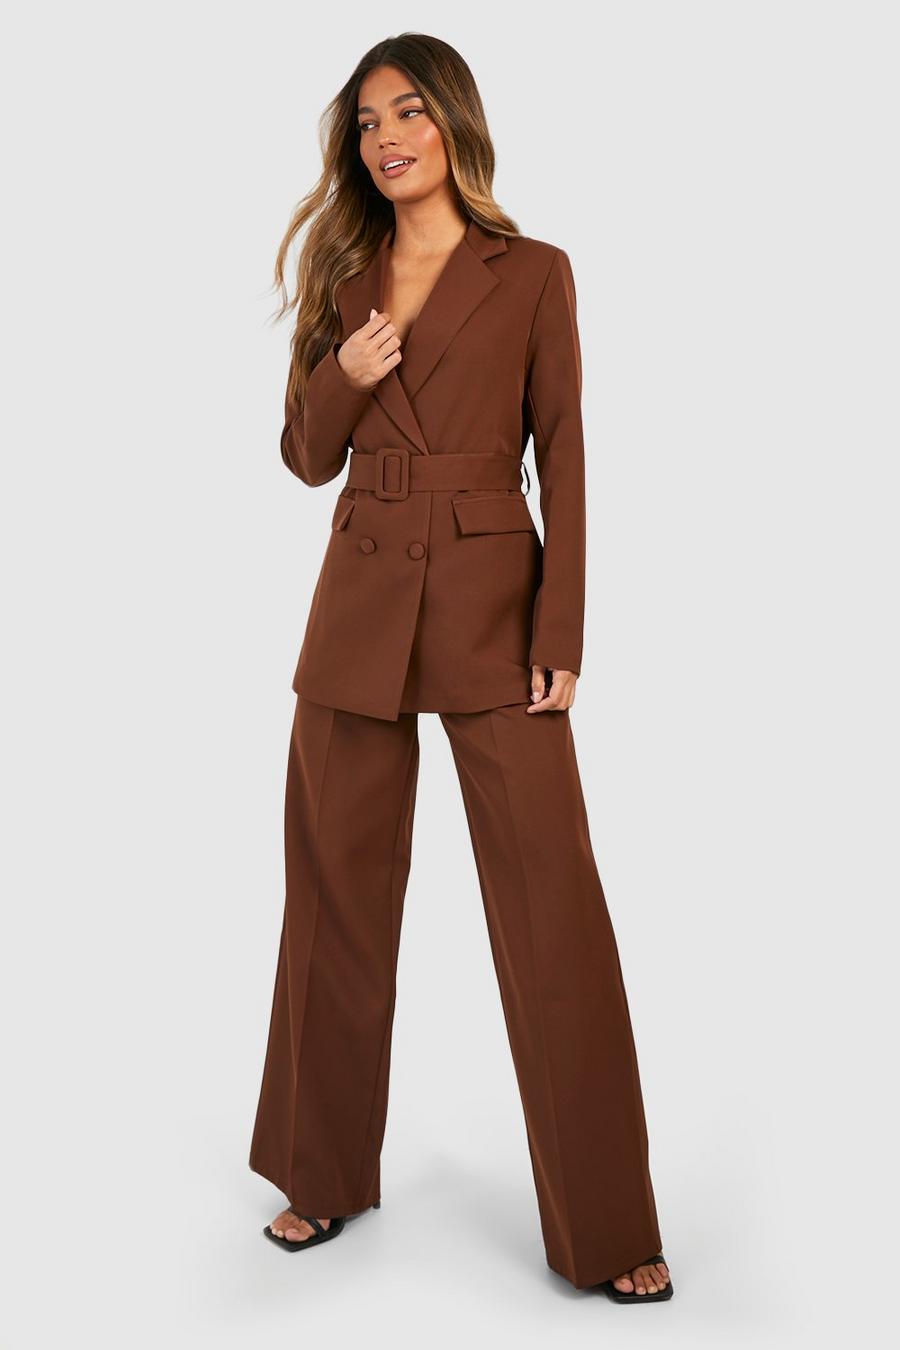 Chocolate Relaxed Fit Wide Leg Dress Pants